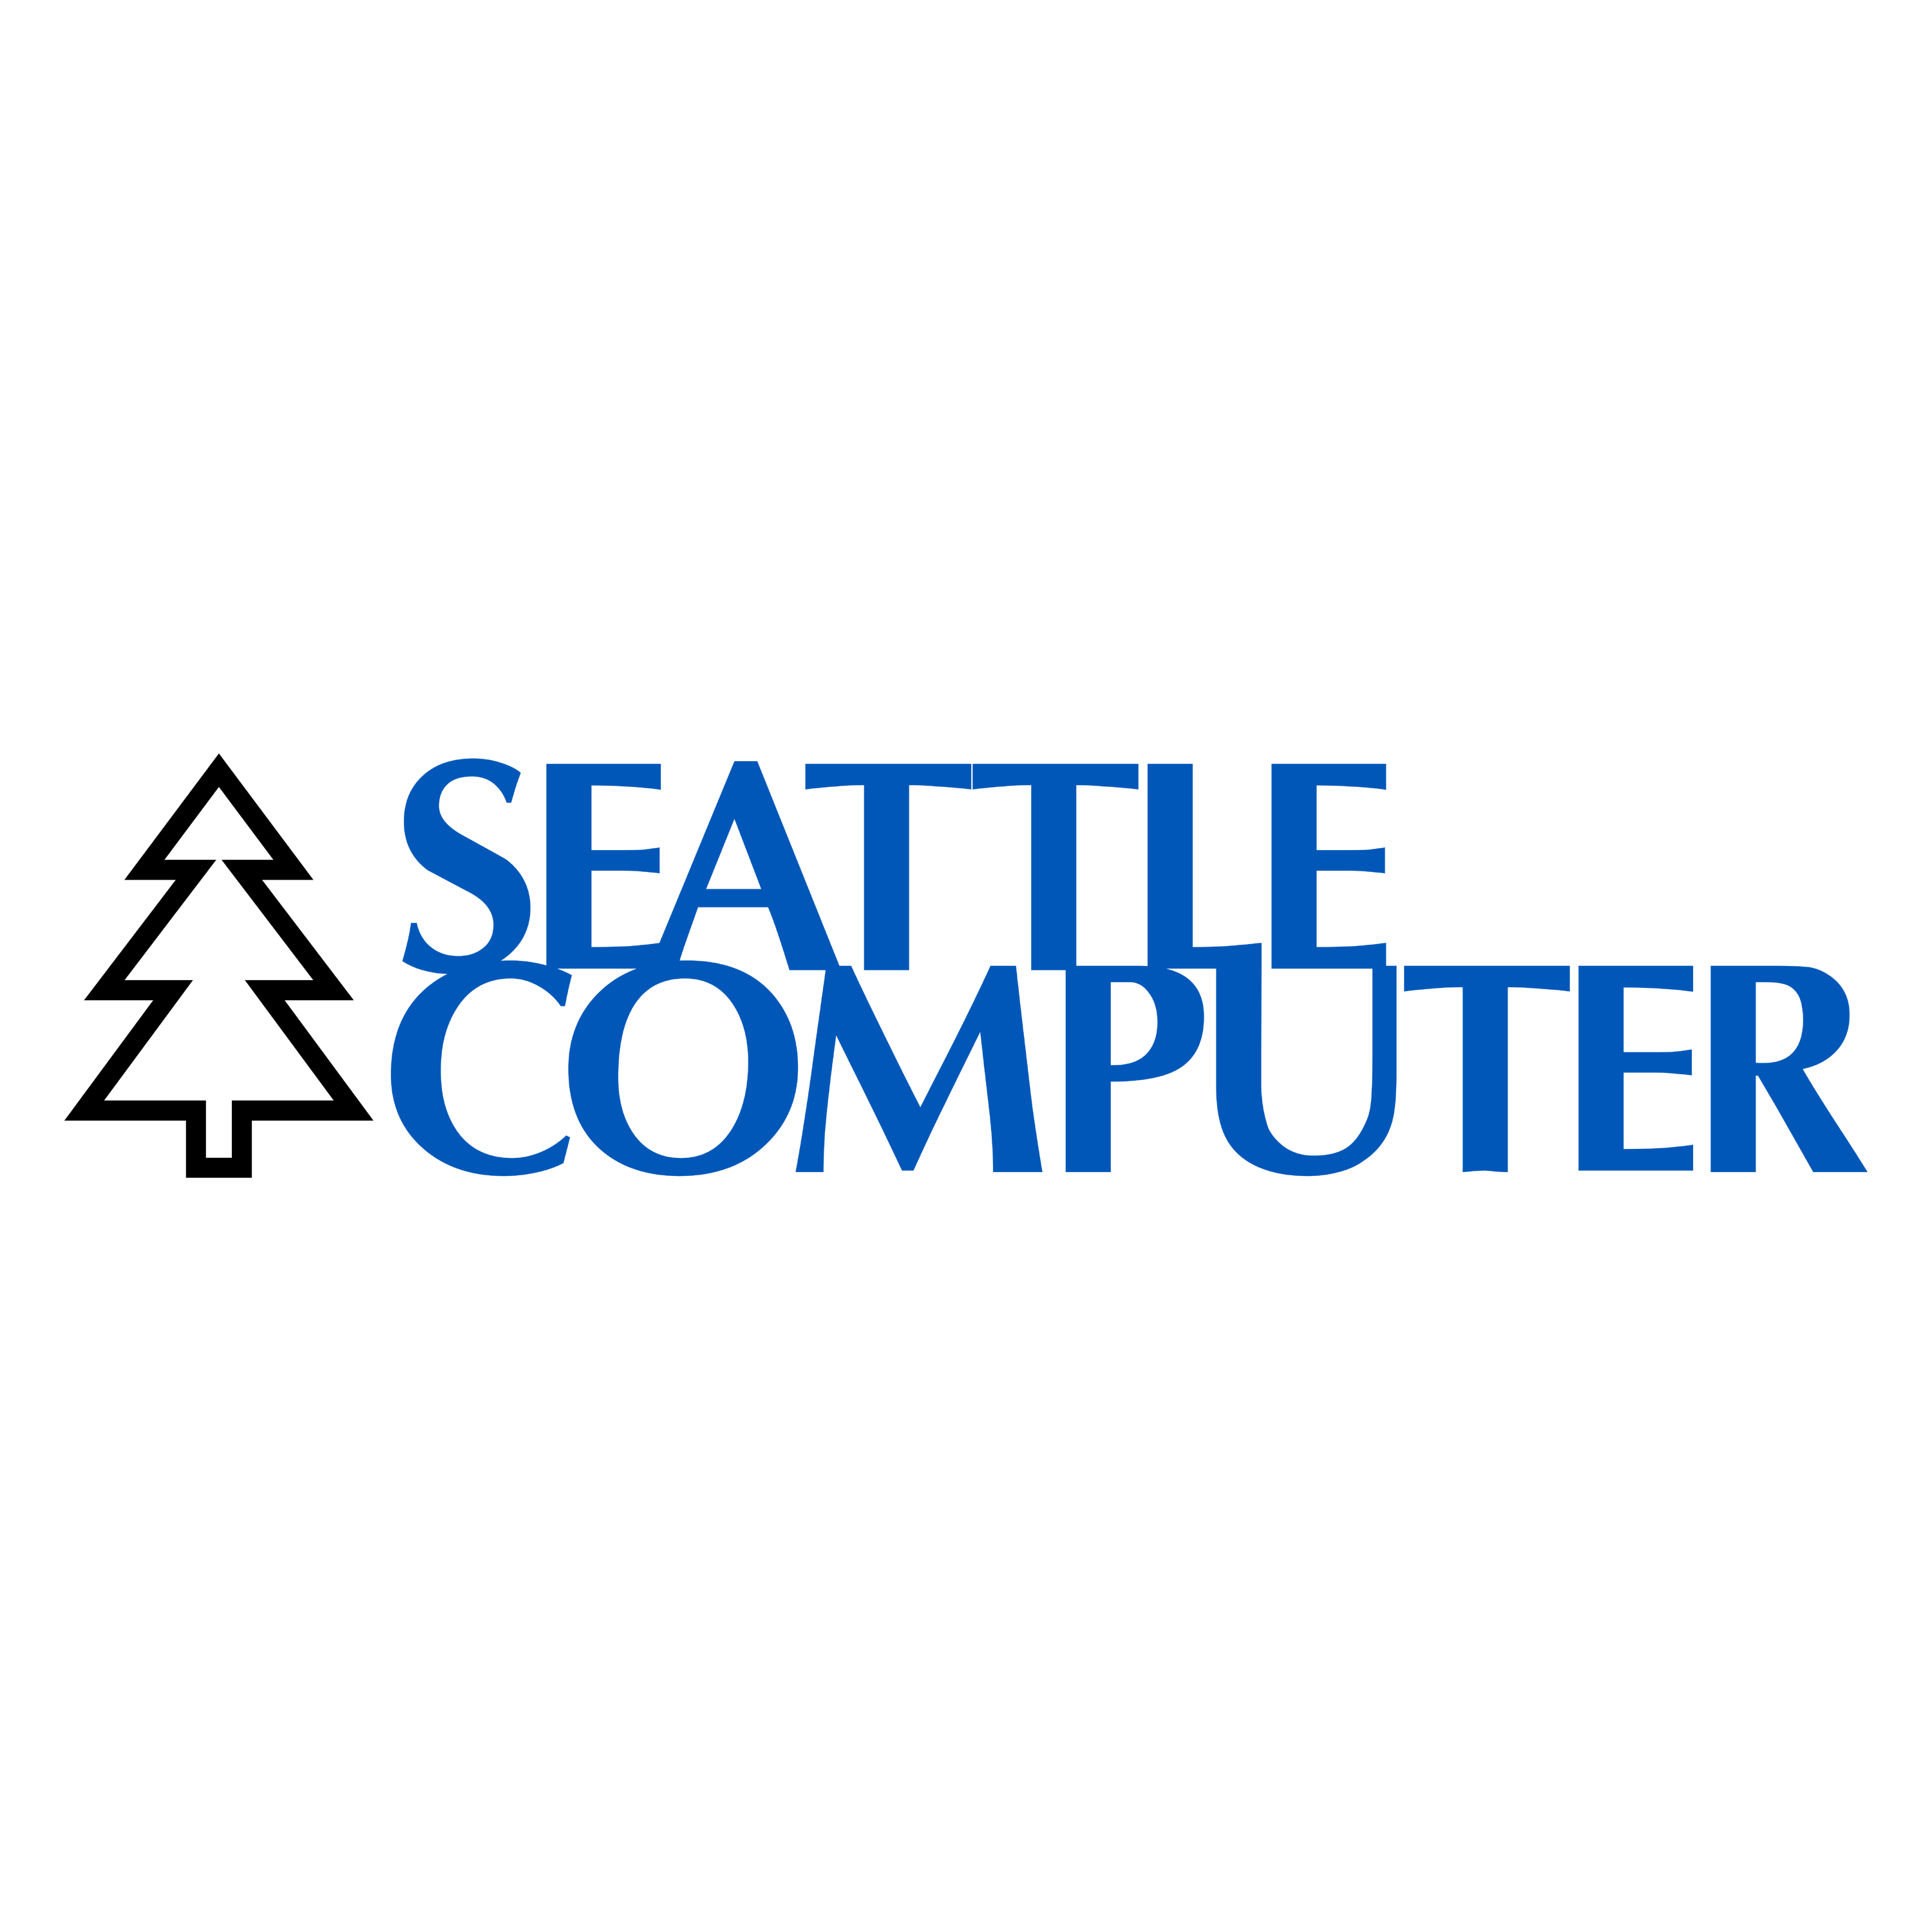 Seattle Computer Products Logo Transparent Image